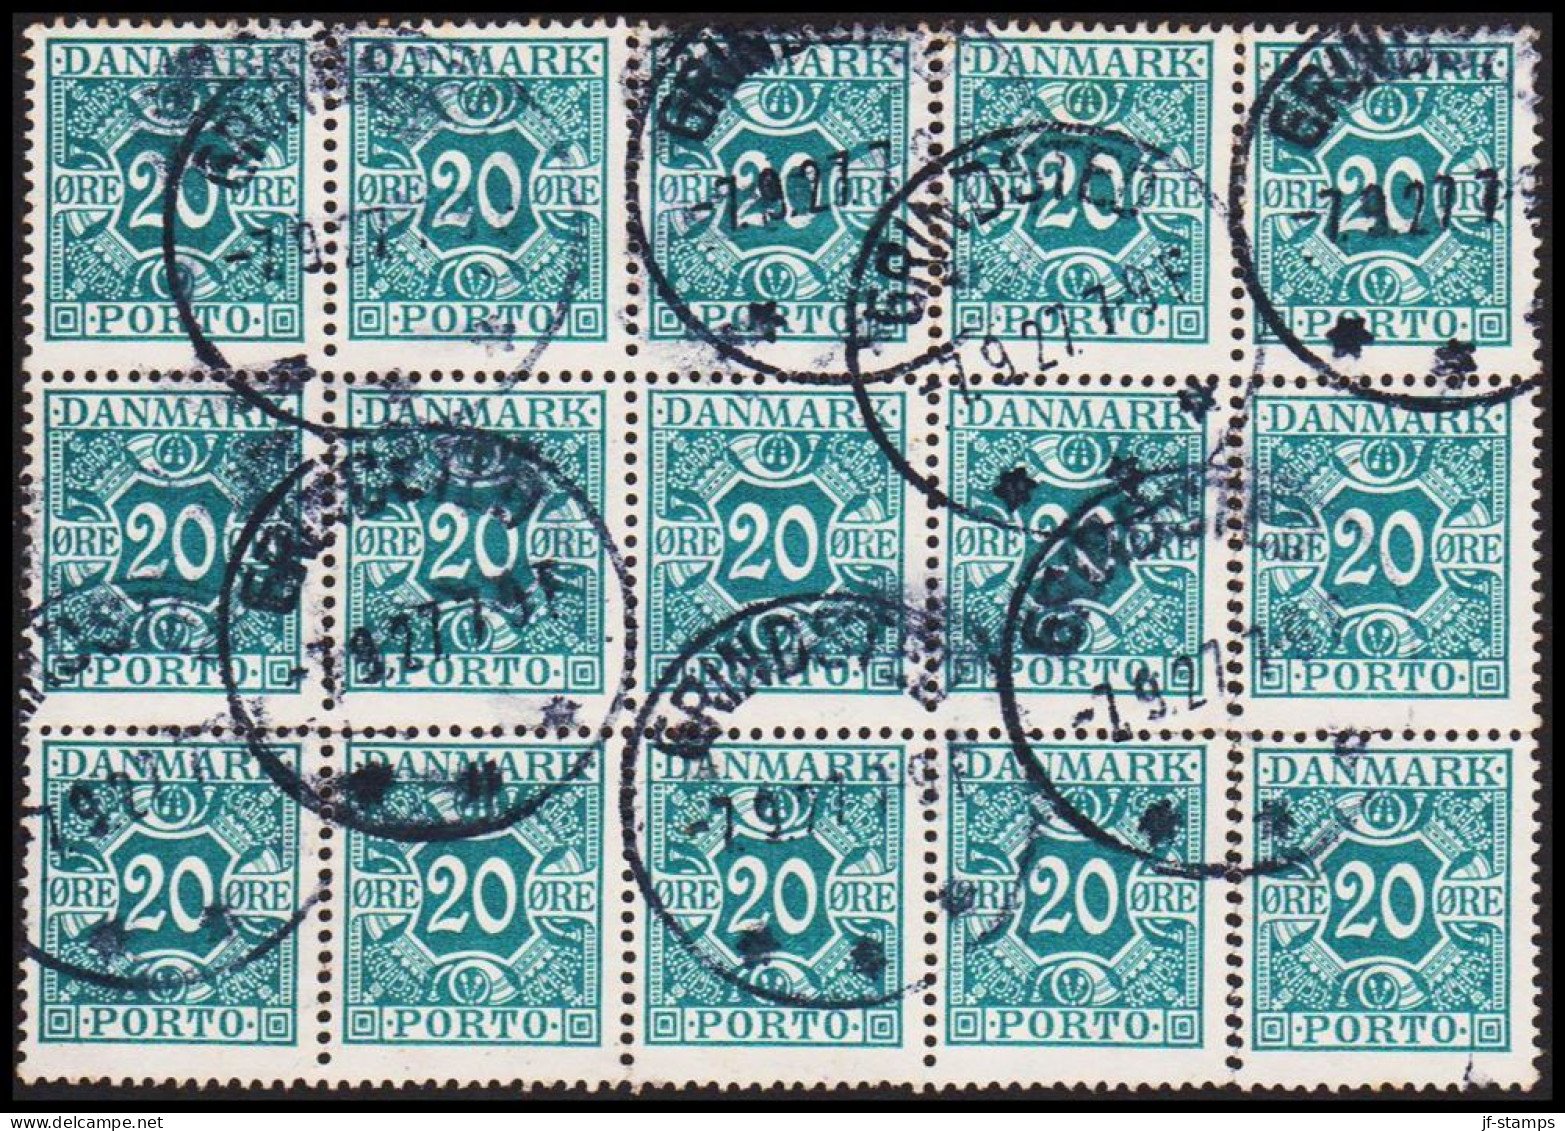 1924. DANMARK. Postage Due. Porto. 20 Øre Blue In 15block Cancelled GRINDSTED 7.9.27. Unusual... (Michel P14) - JF545143 - Postage Due